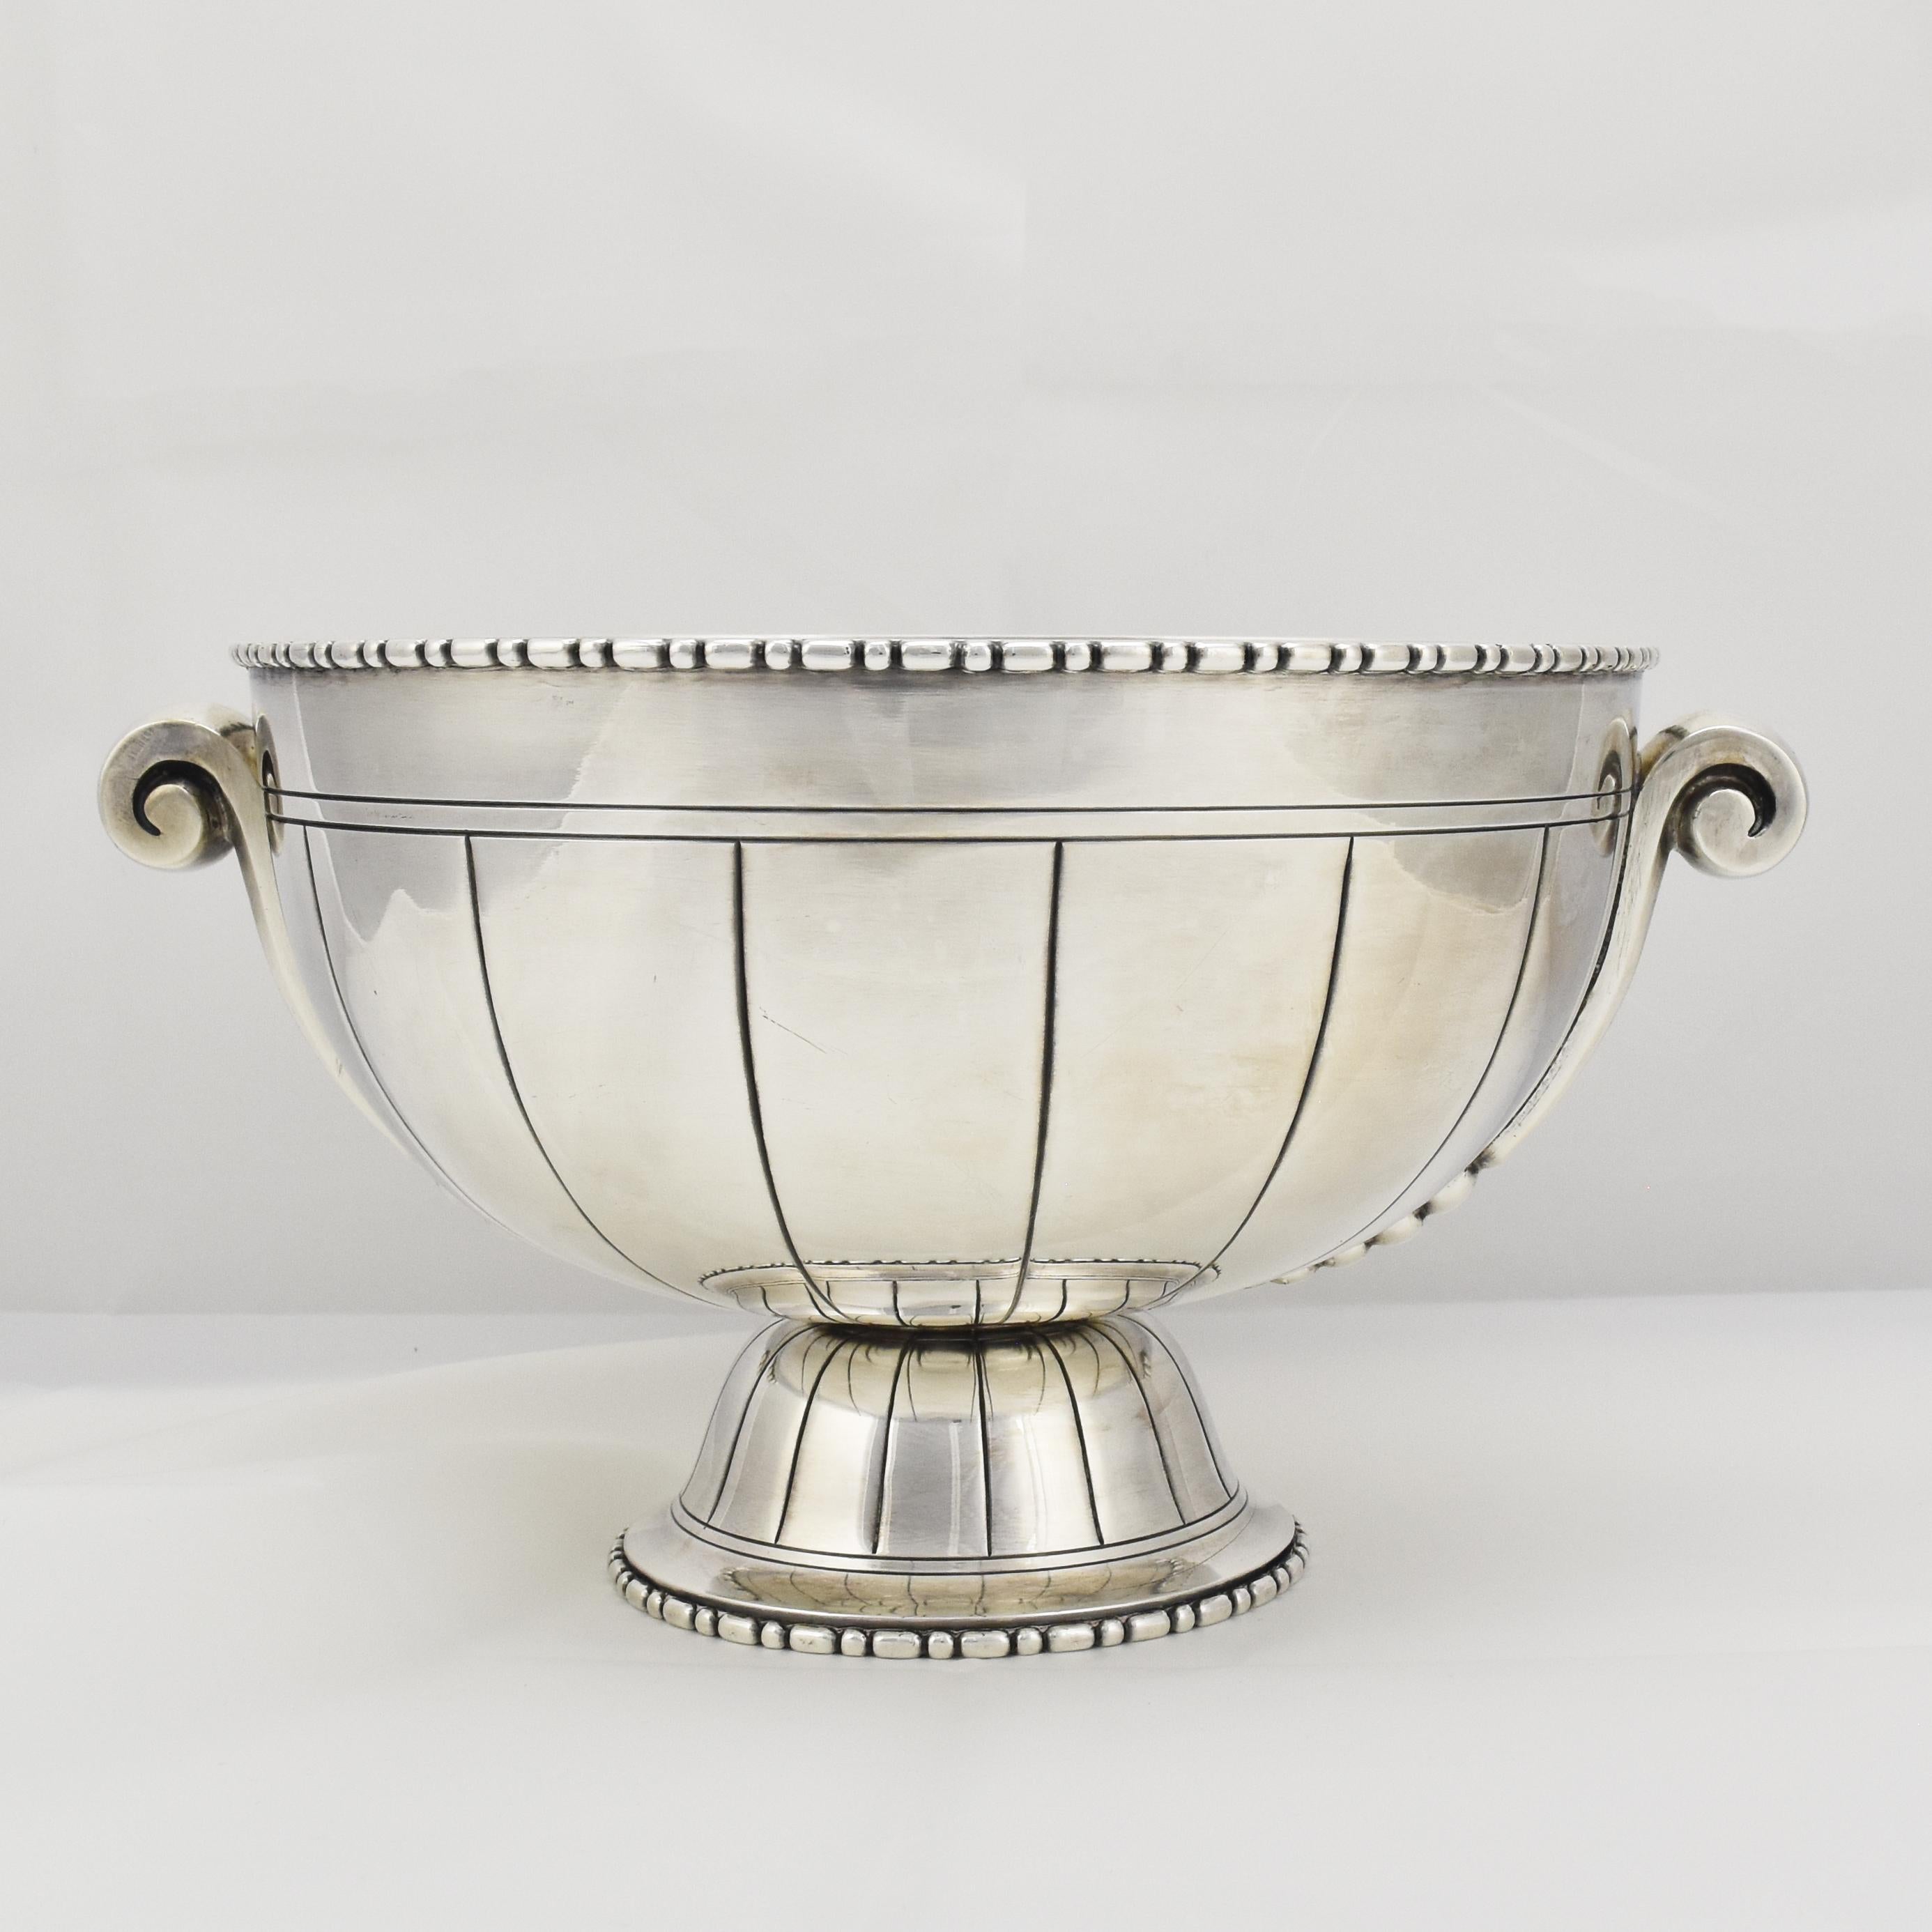 Early 20th Century French Art Deco Centerpiece Silverplate Bowl by Bouillet & Bourdelle 1920s For Sale